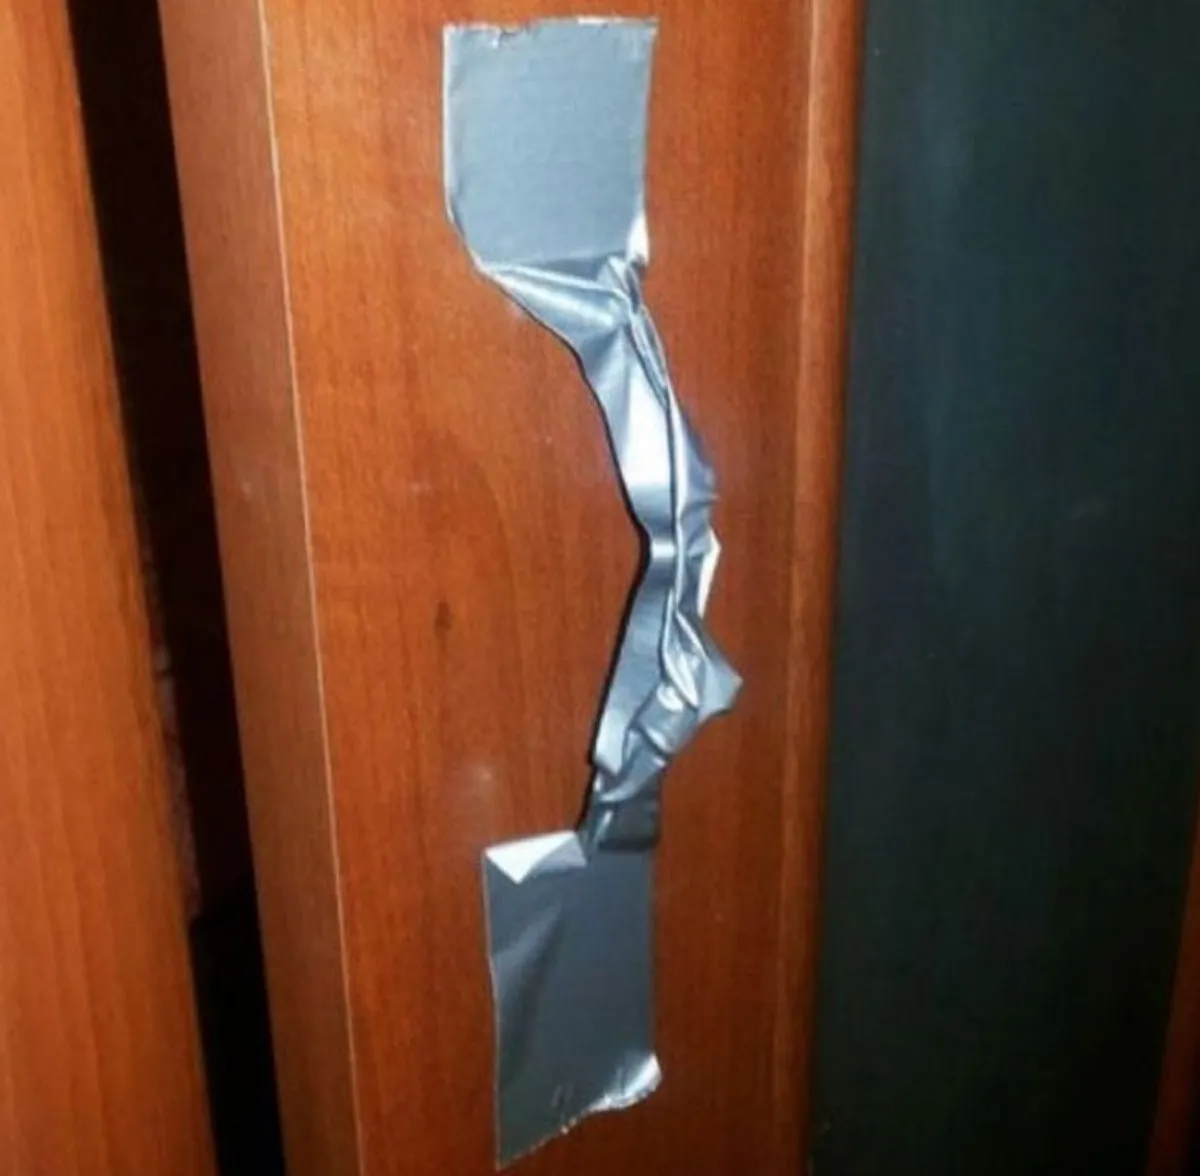 person uses duck tape as a door handle